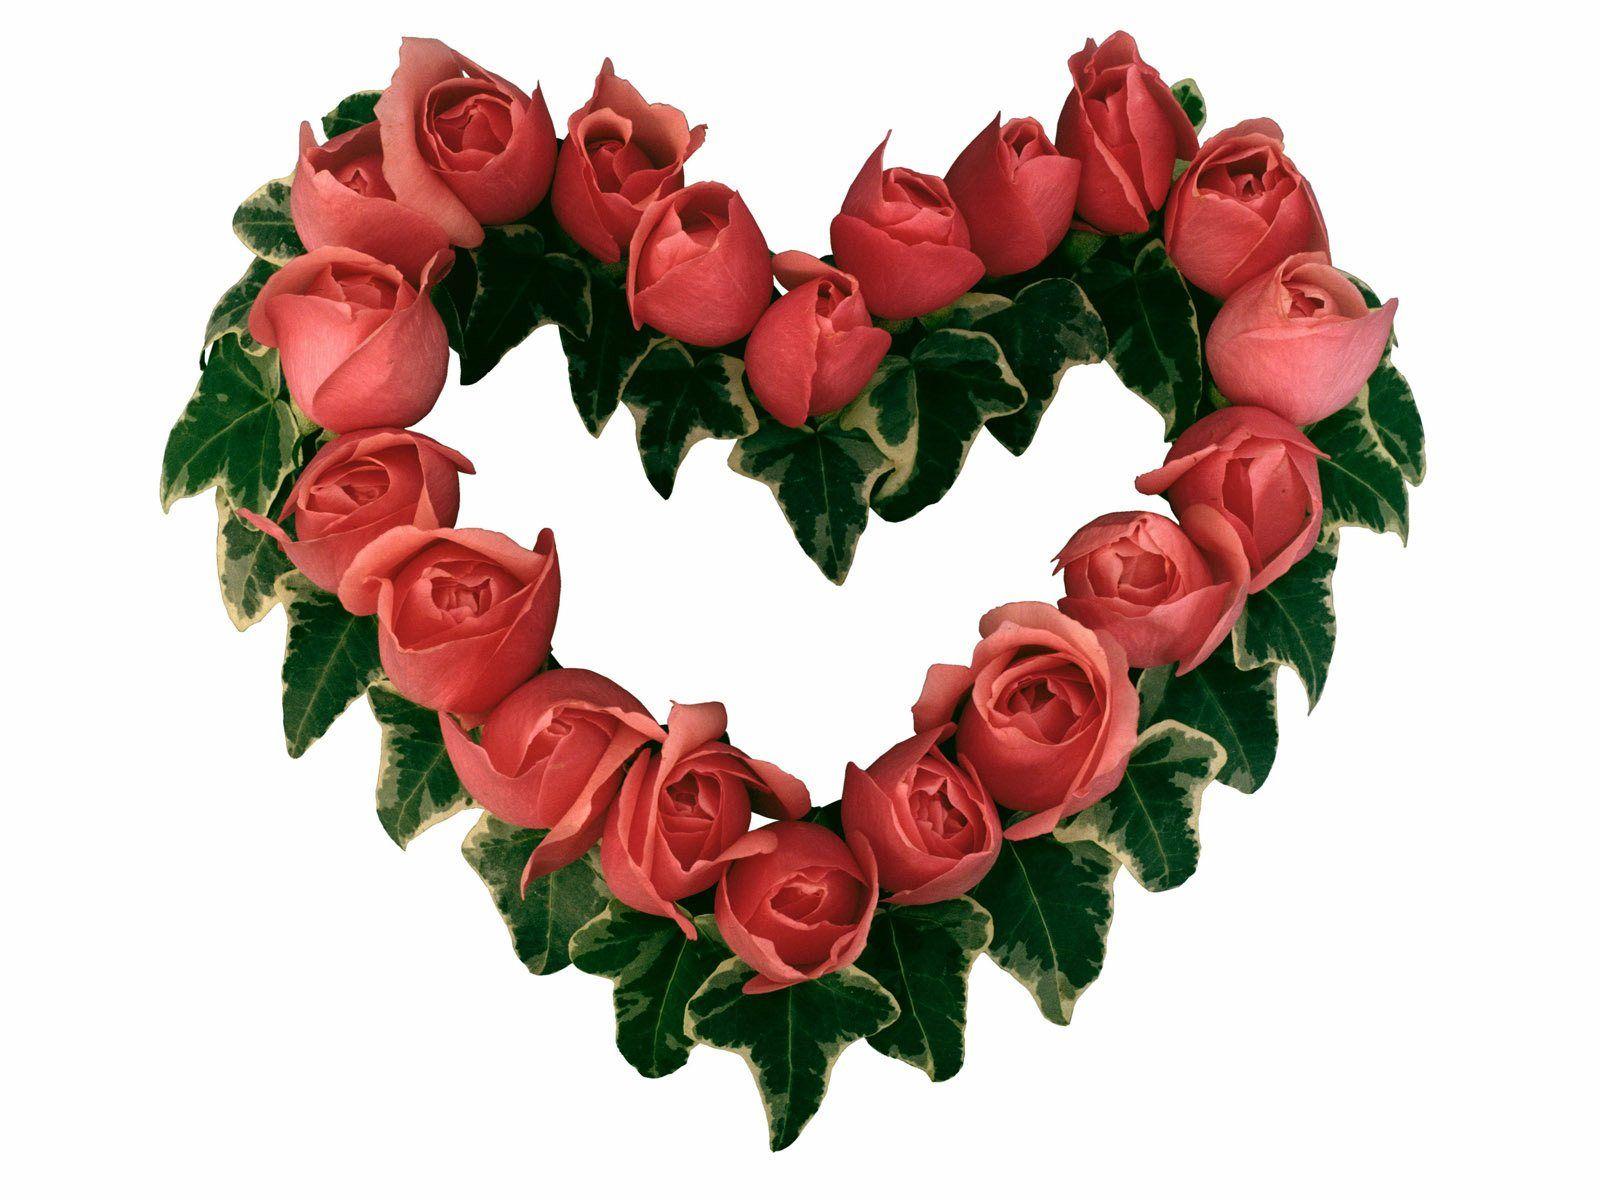 Heart Shape made of Roses widescreen wallpapers